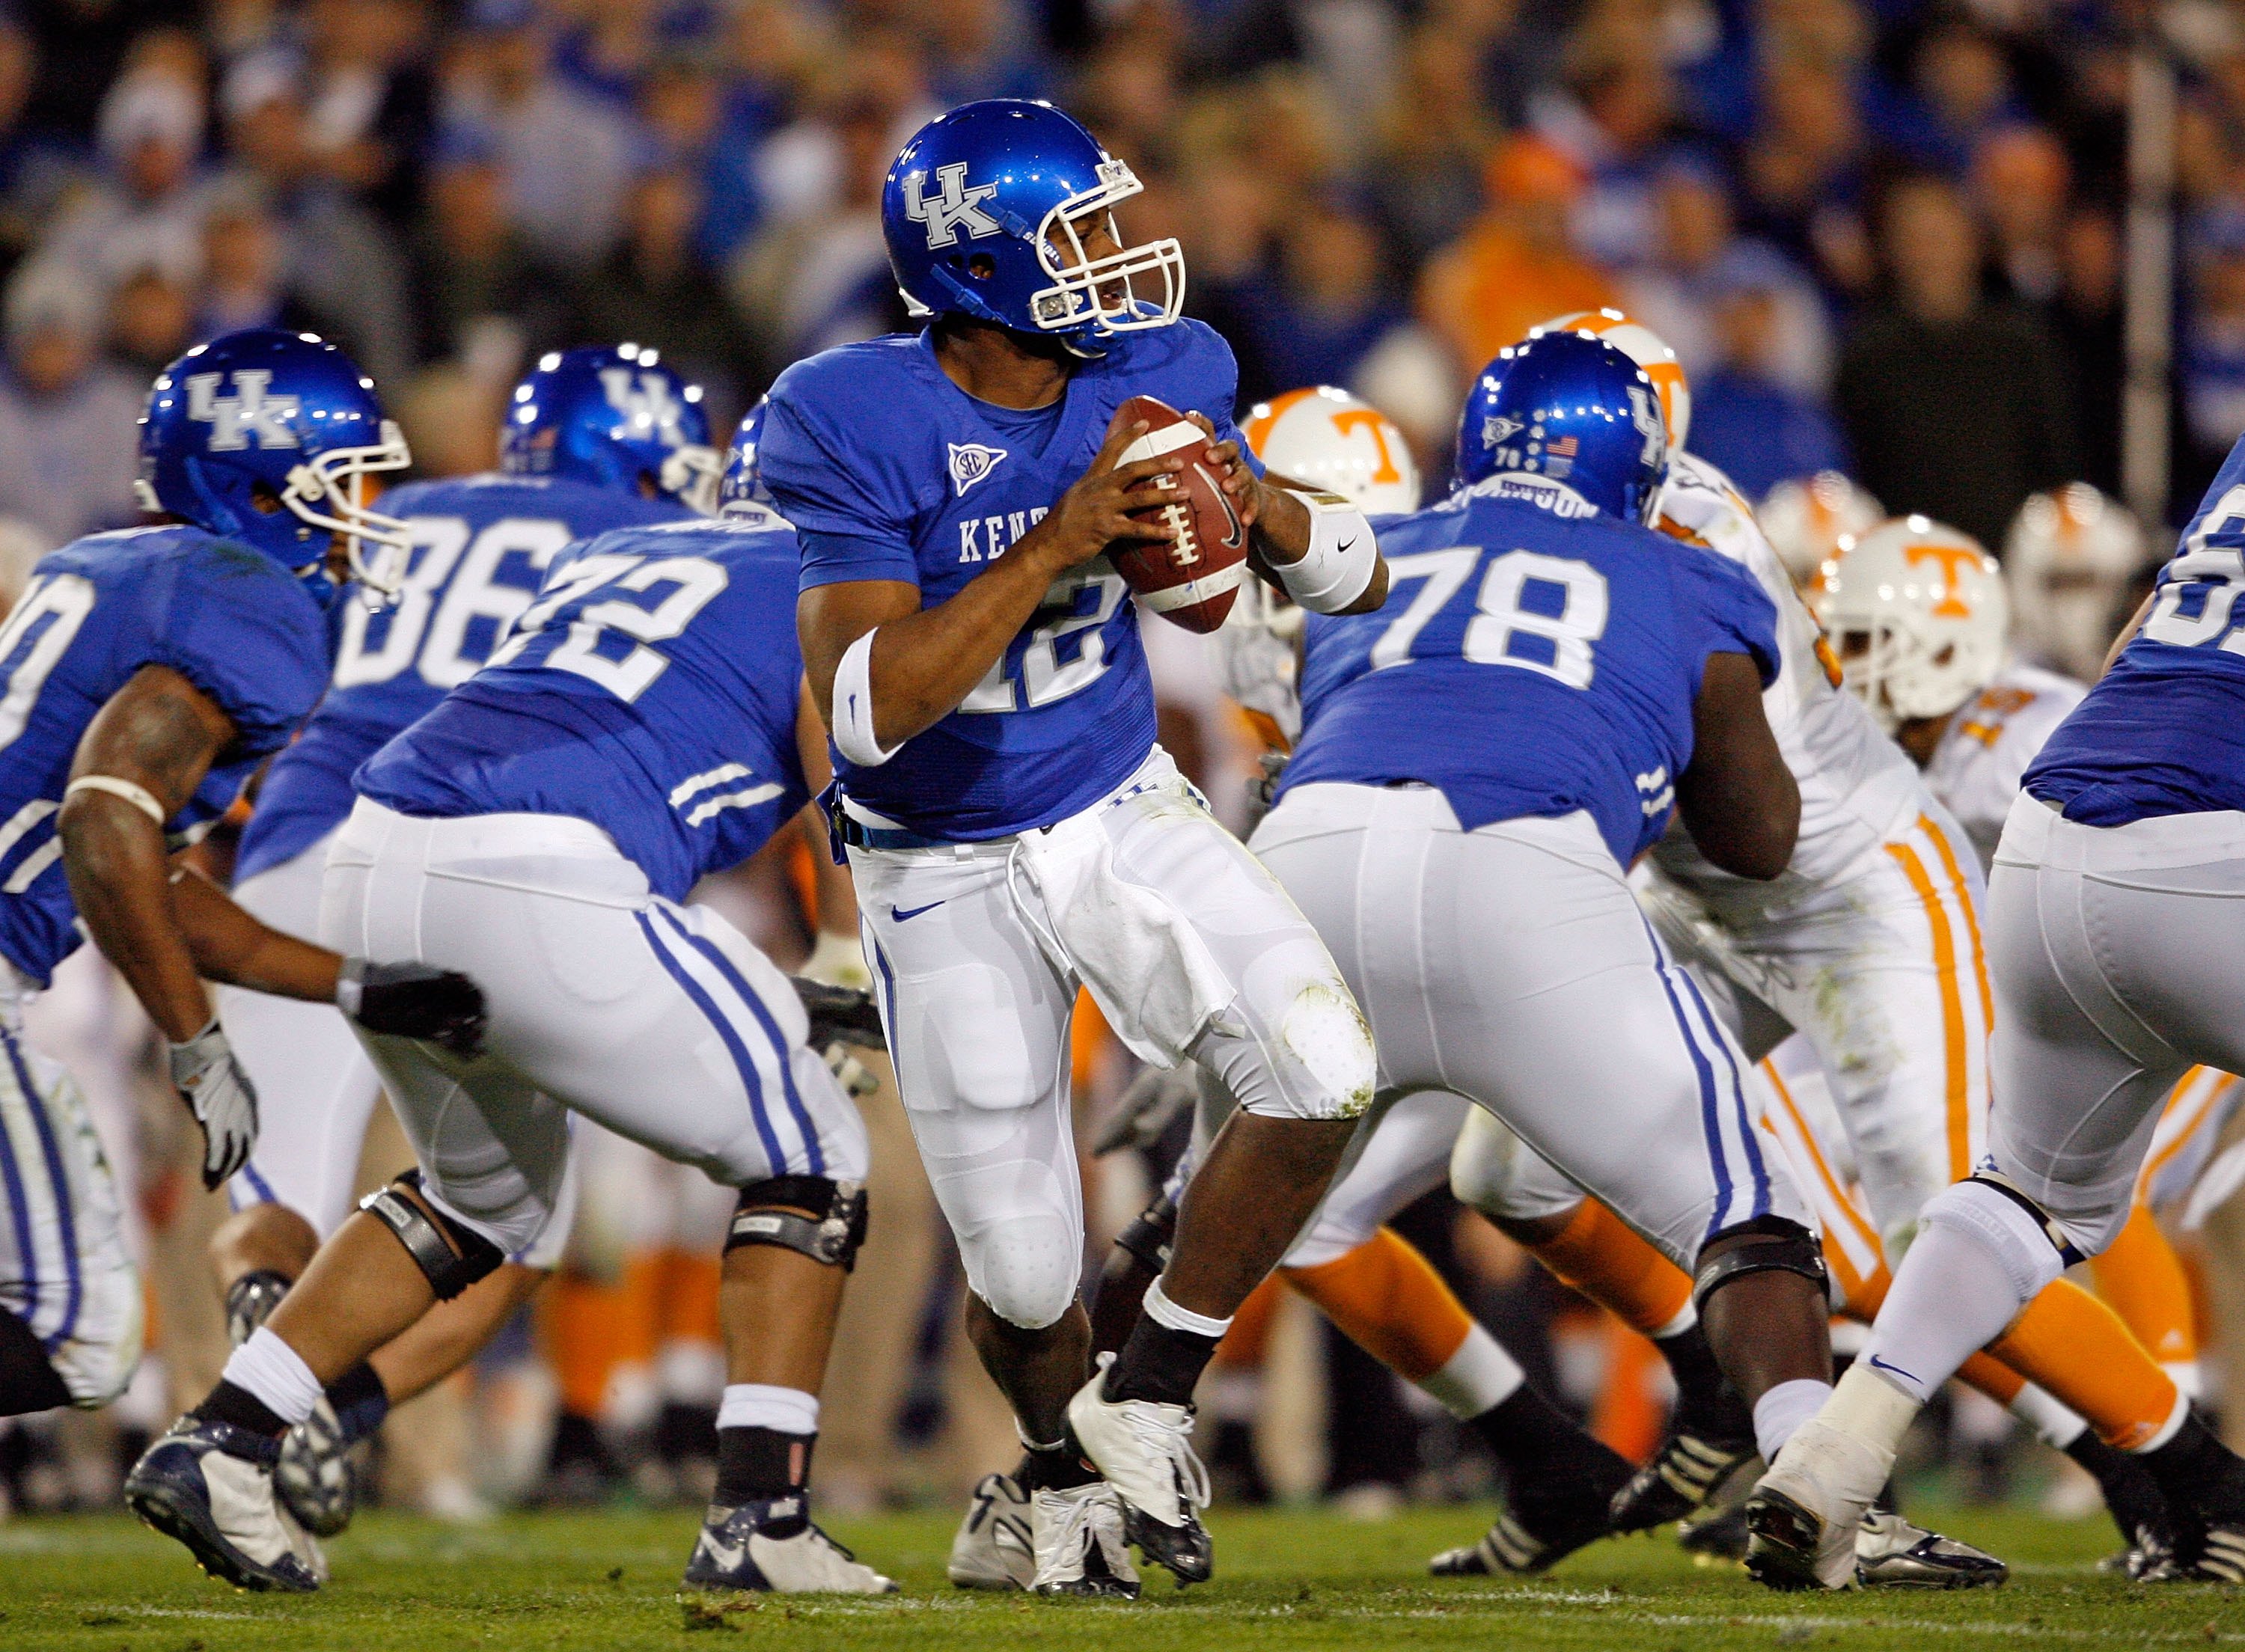 LEXINGTON, KY - NOVEMBER 28:  Morgan Newton #12 of the Kentucky Wildcats throws the ball against the Tennessee Volunteers during the SEC game at Commonwealth Stadium on November 28, 2009 in Lexington, Kentucky.  (Photo by Andy Lyons/Getty Images)